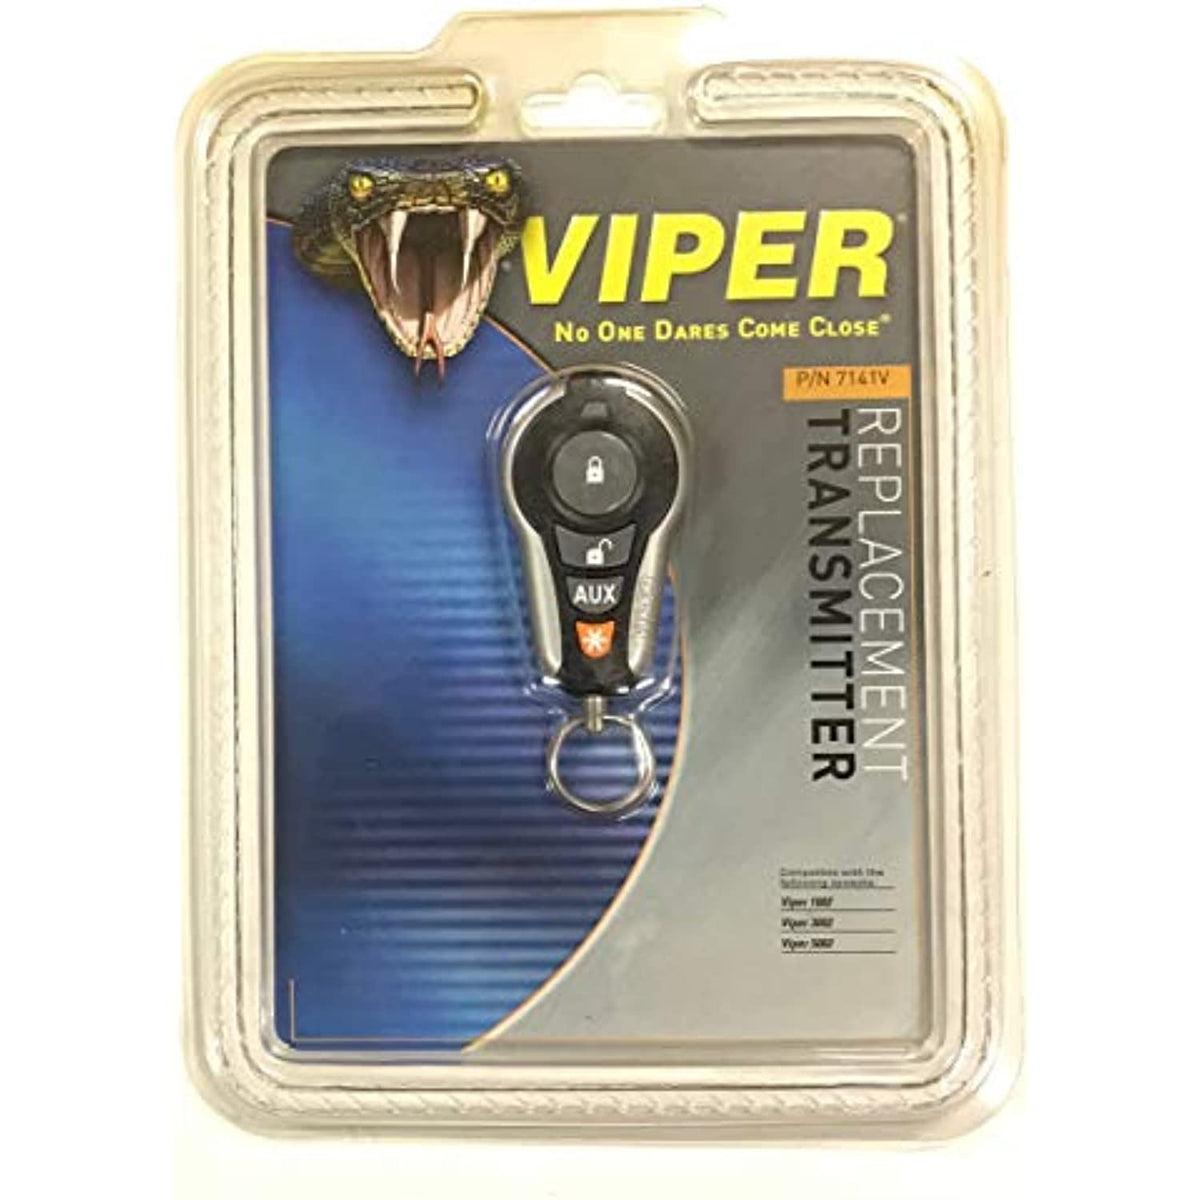 Viper 7141V 4-Button Remote Replacement 1 Way Remote Control Transmitter